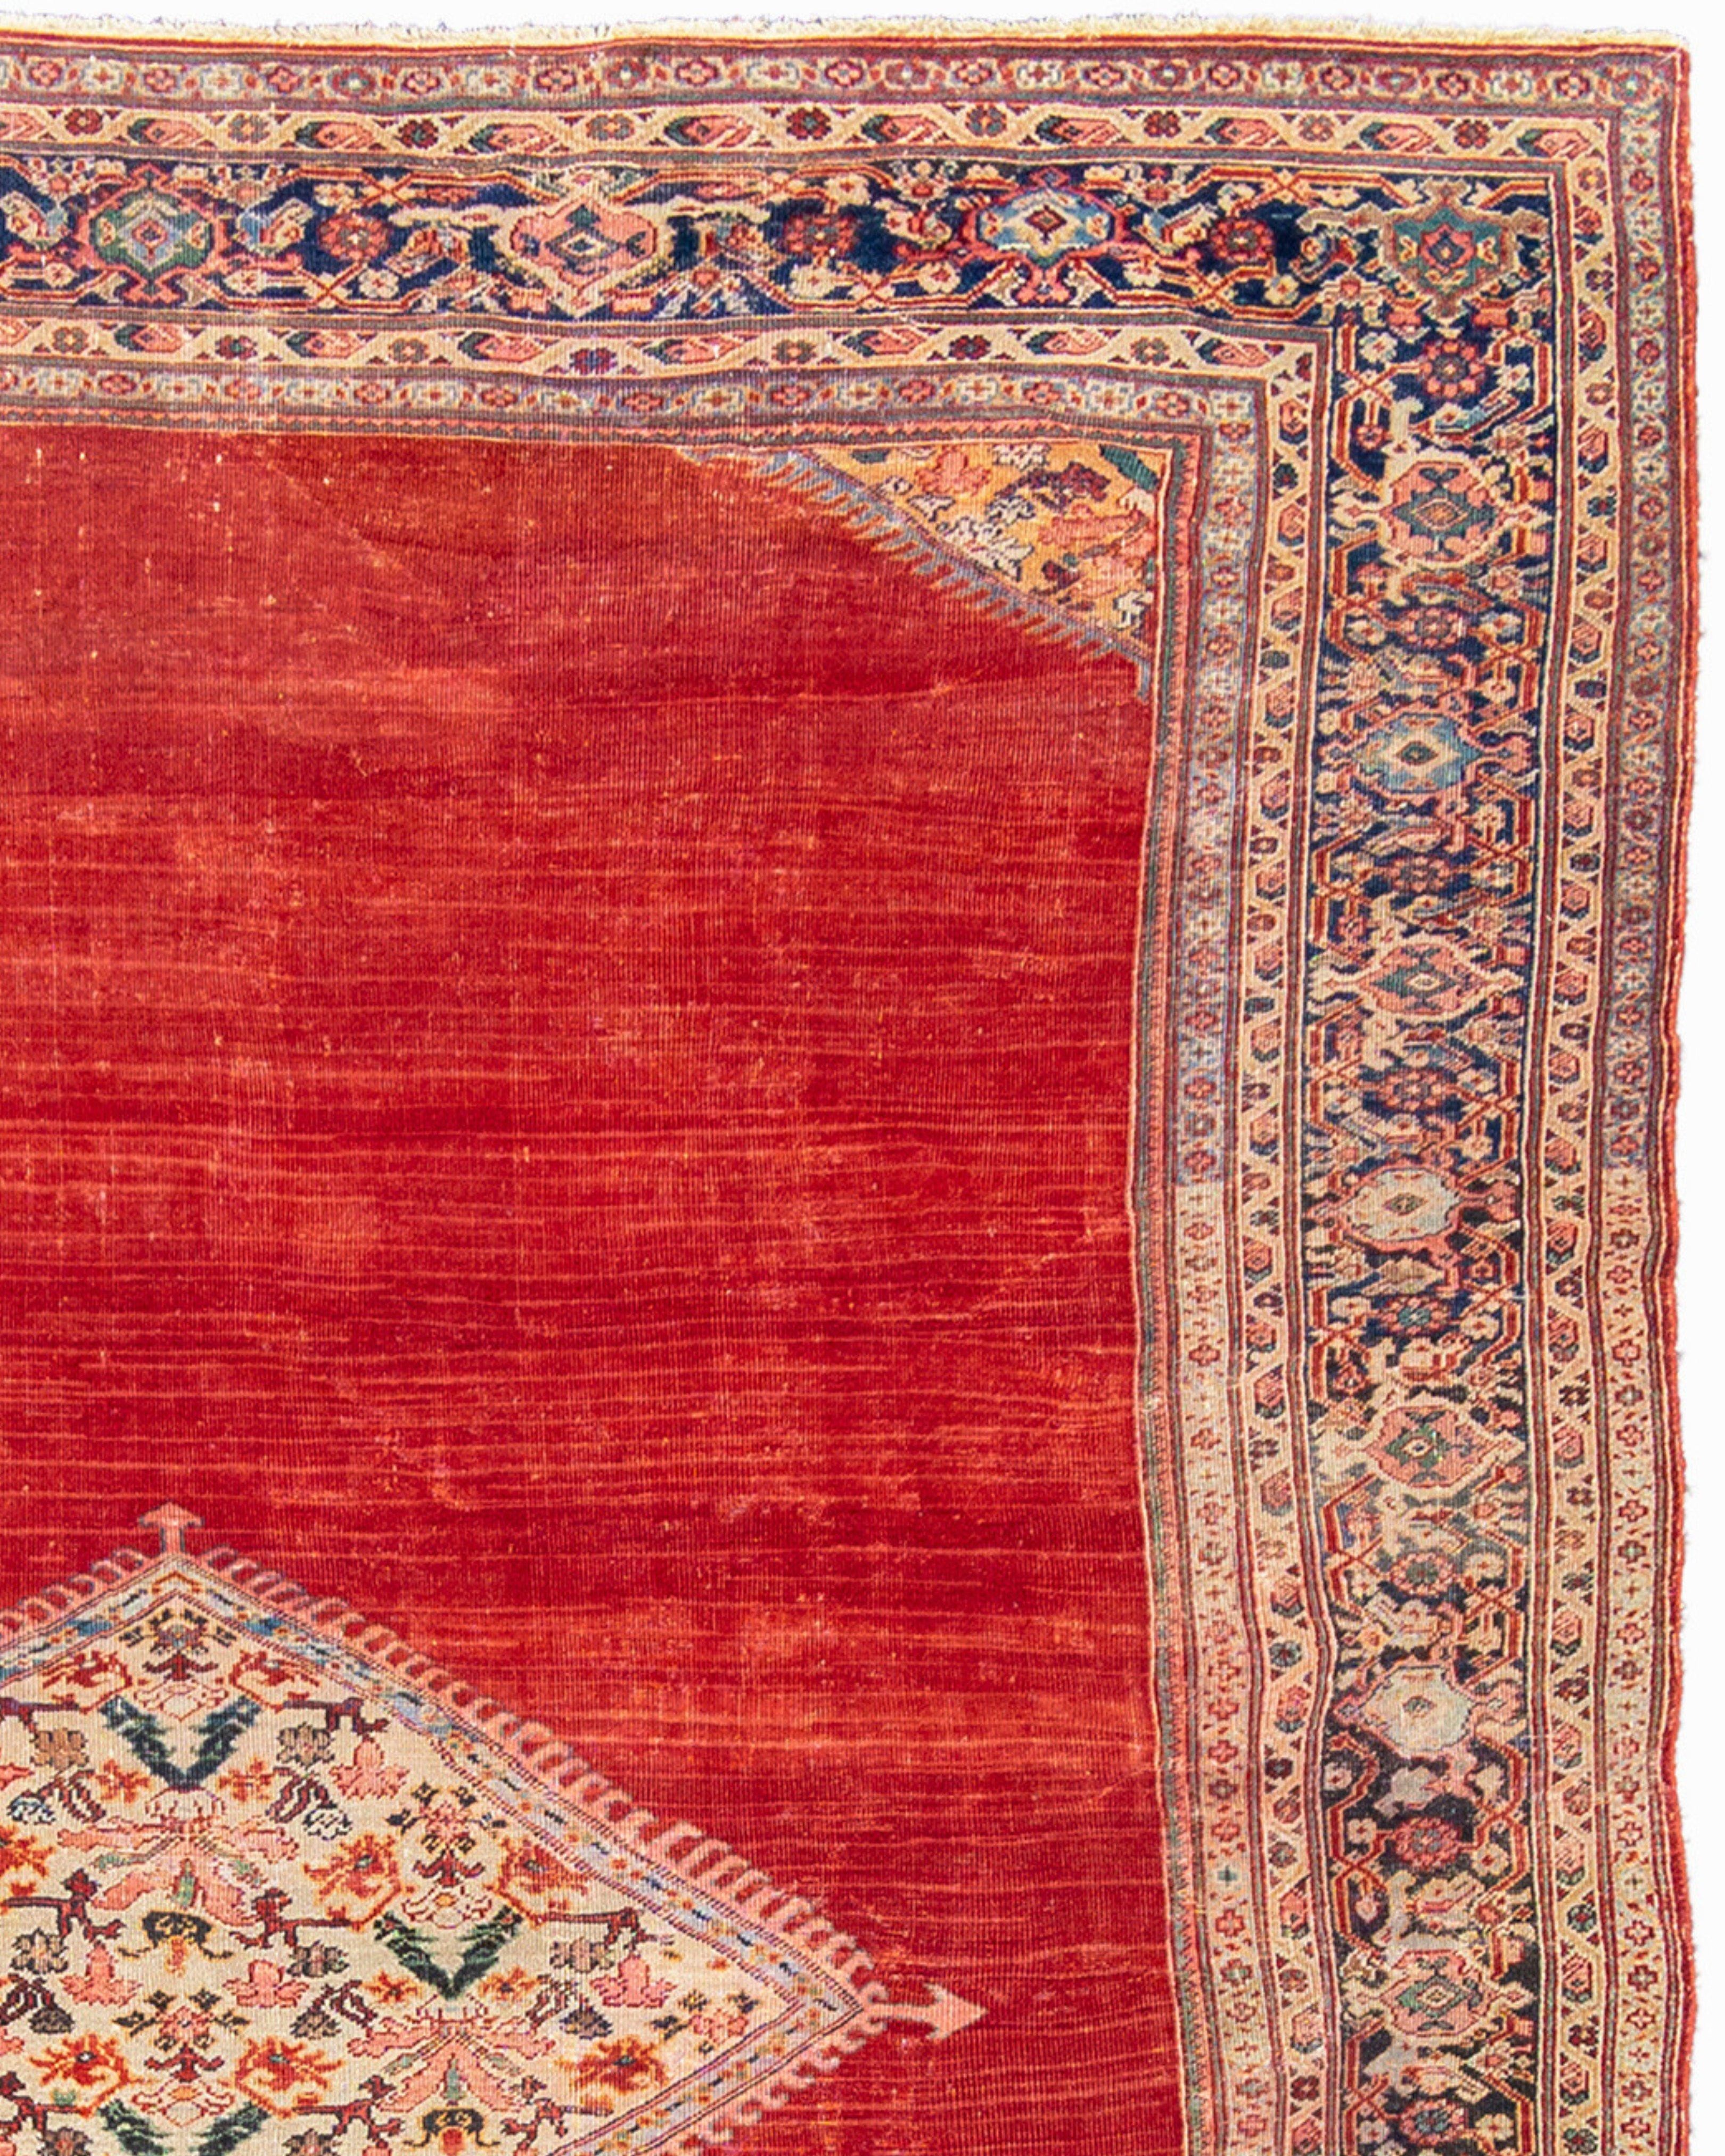 Antique Large Red Persian Mahal Carpet, c. 1900

Additional Information:
Dimensions: 9'2